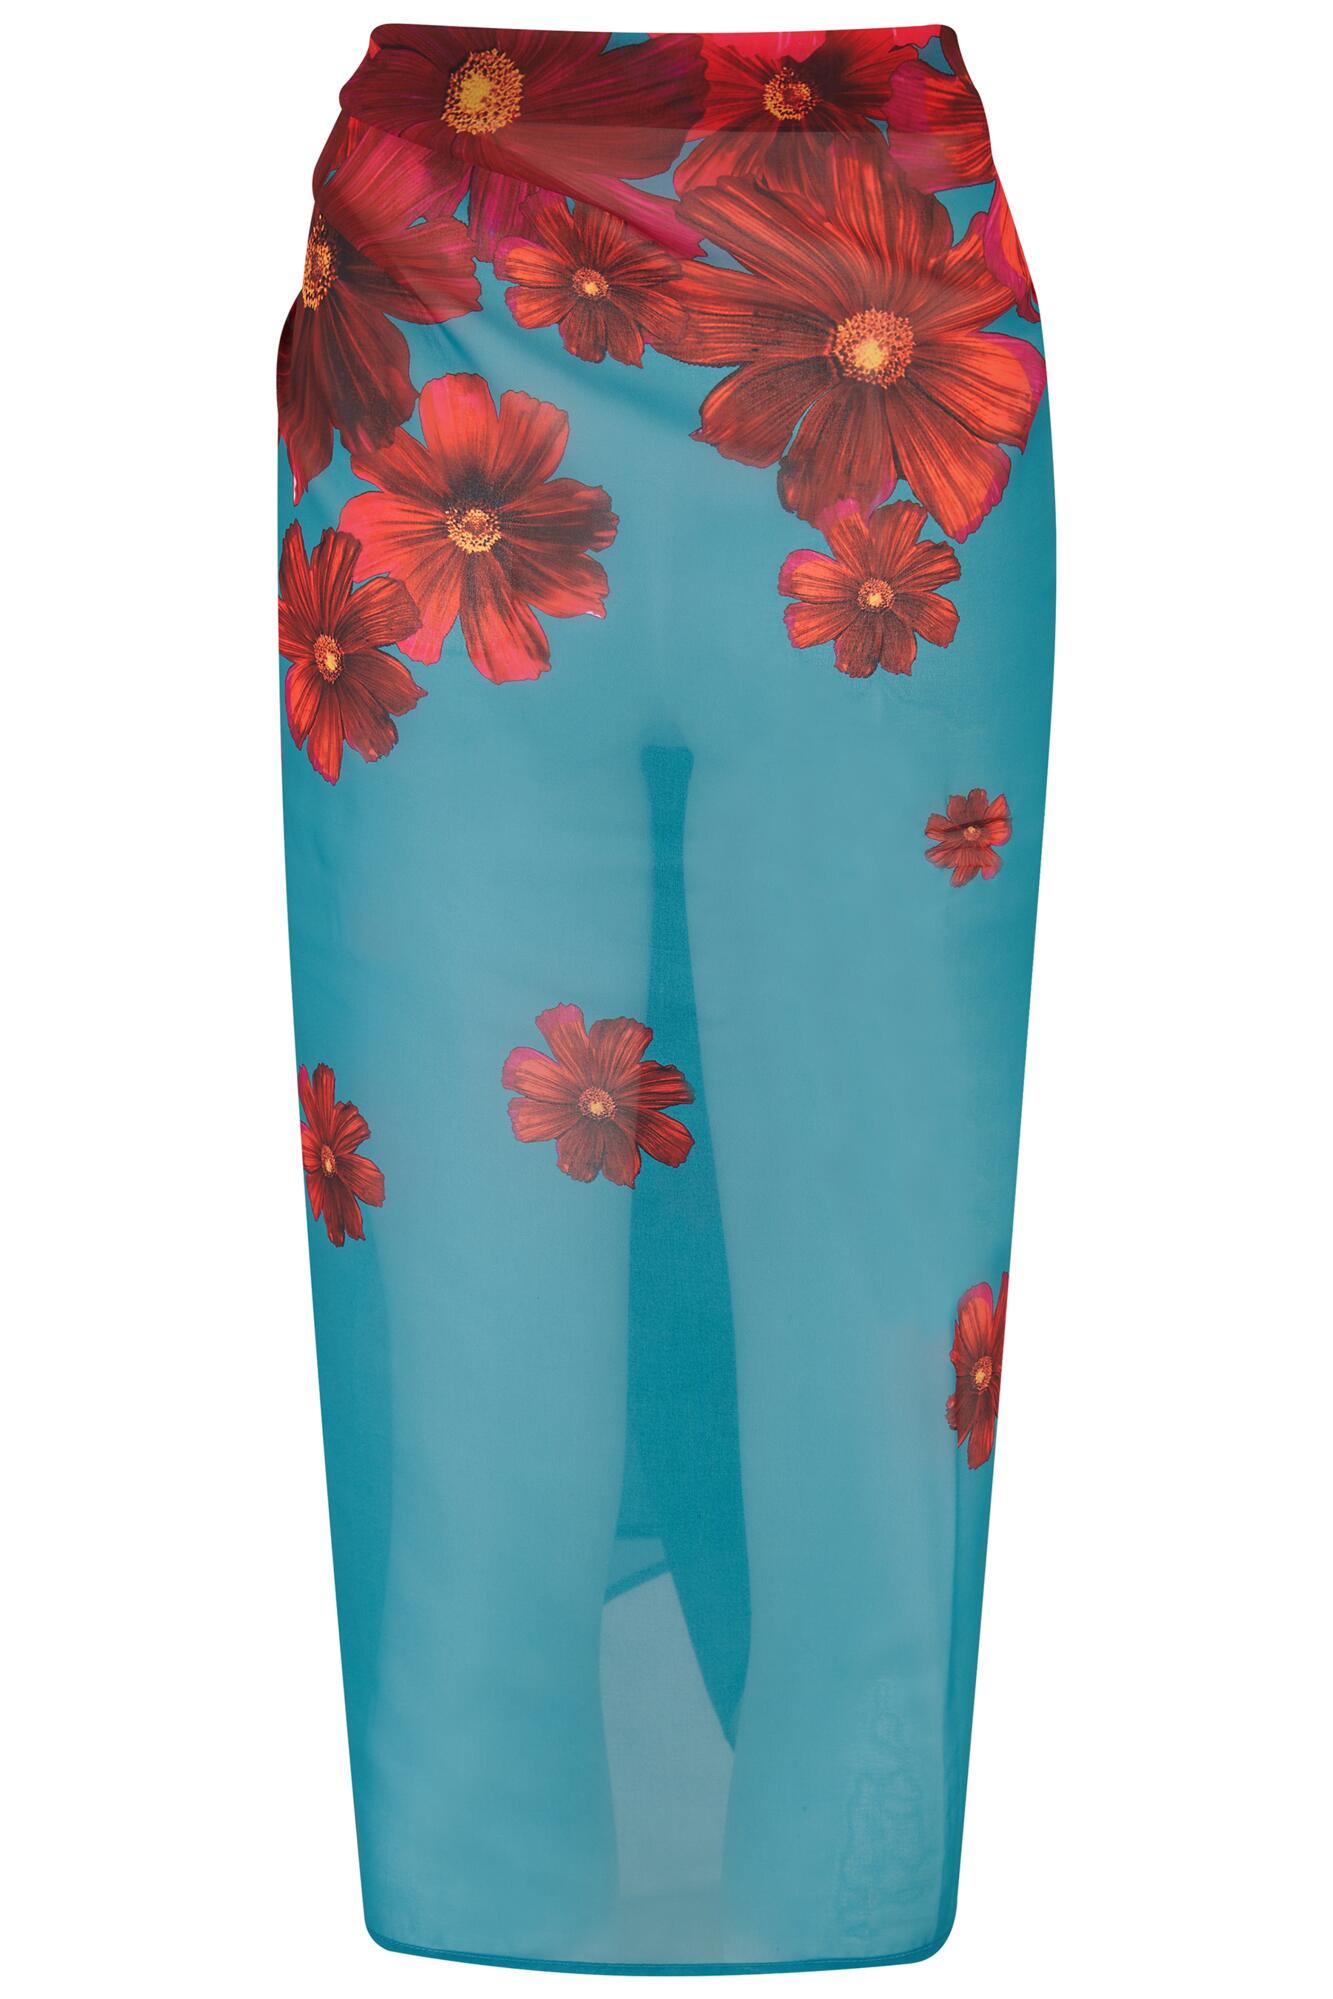 PAREO PANTS IN RED ORCHID PRINT